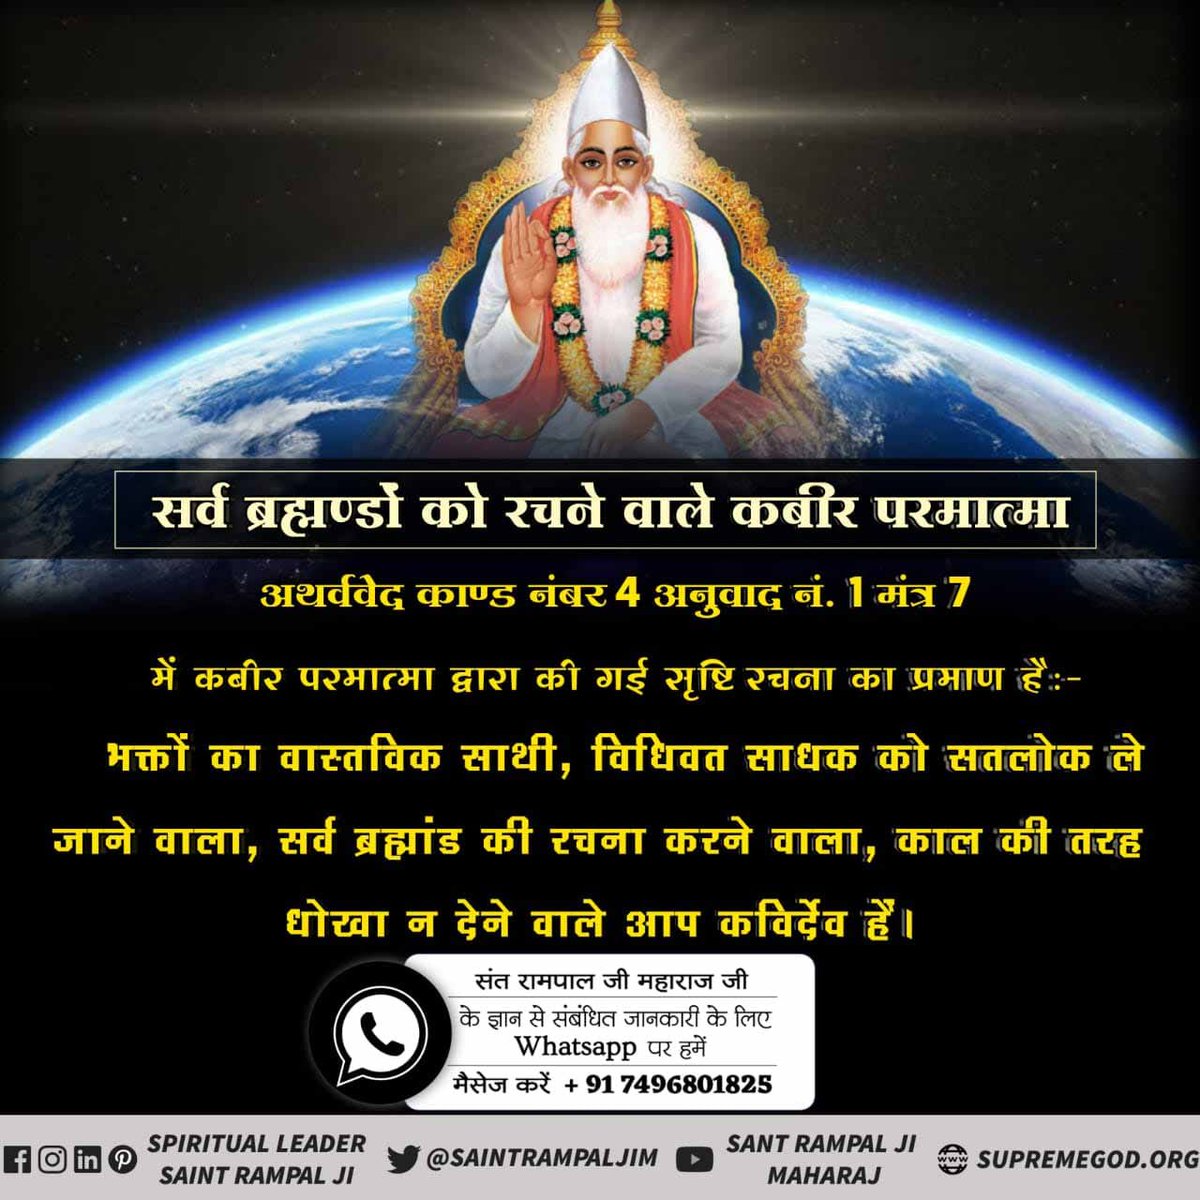 #अविनाशी_परमात्मा_कबीर
Lord Kabir is the eternal father of all souls. He never dies nor He takes birth from a mother.
Sant Rampal Ji Maharaj